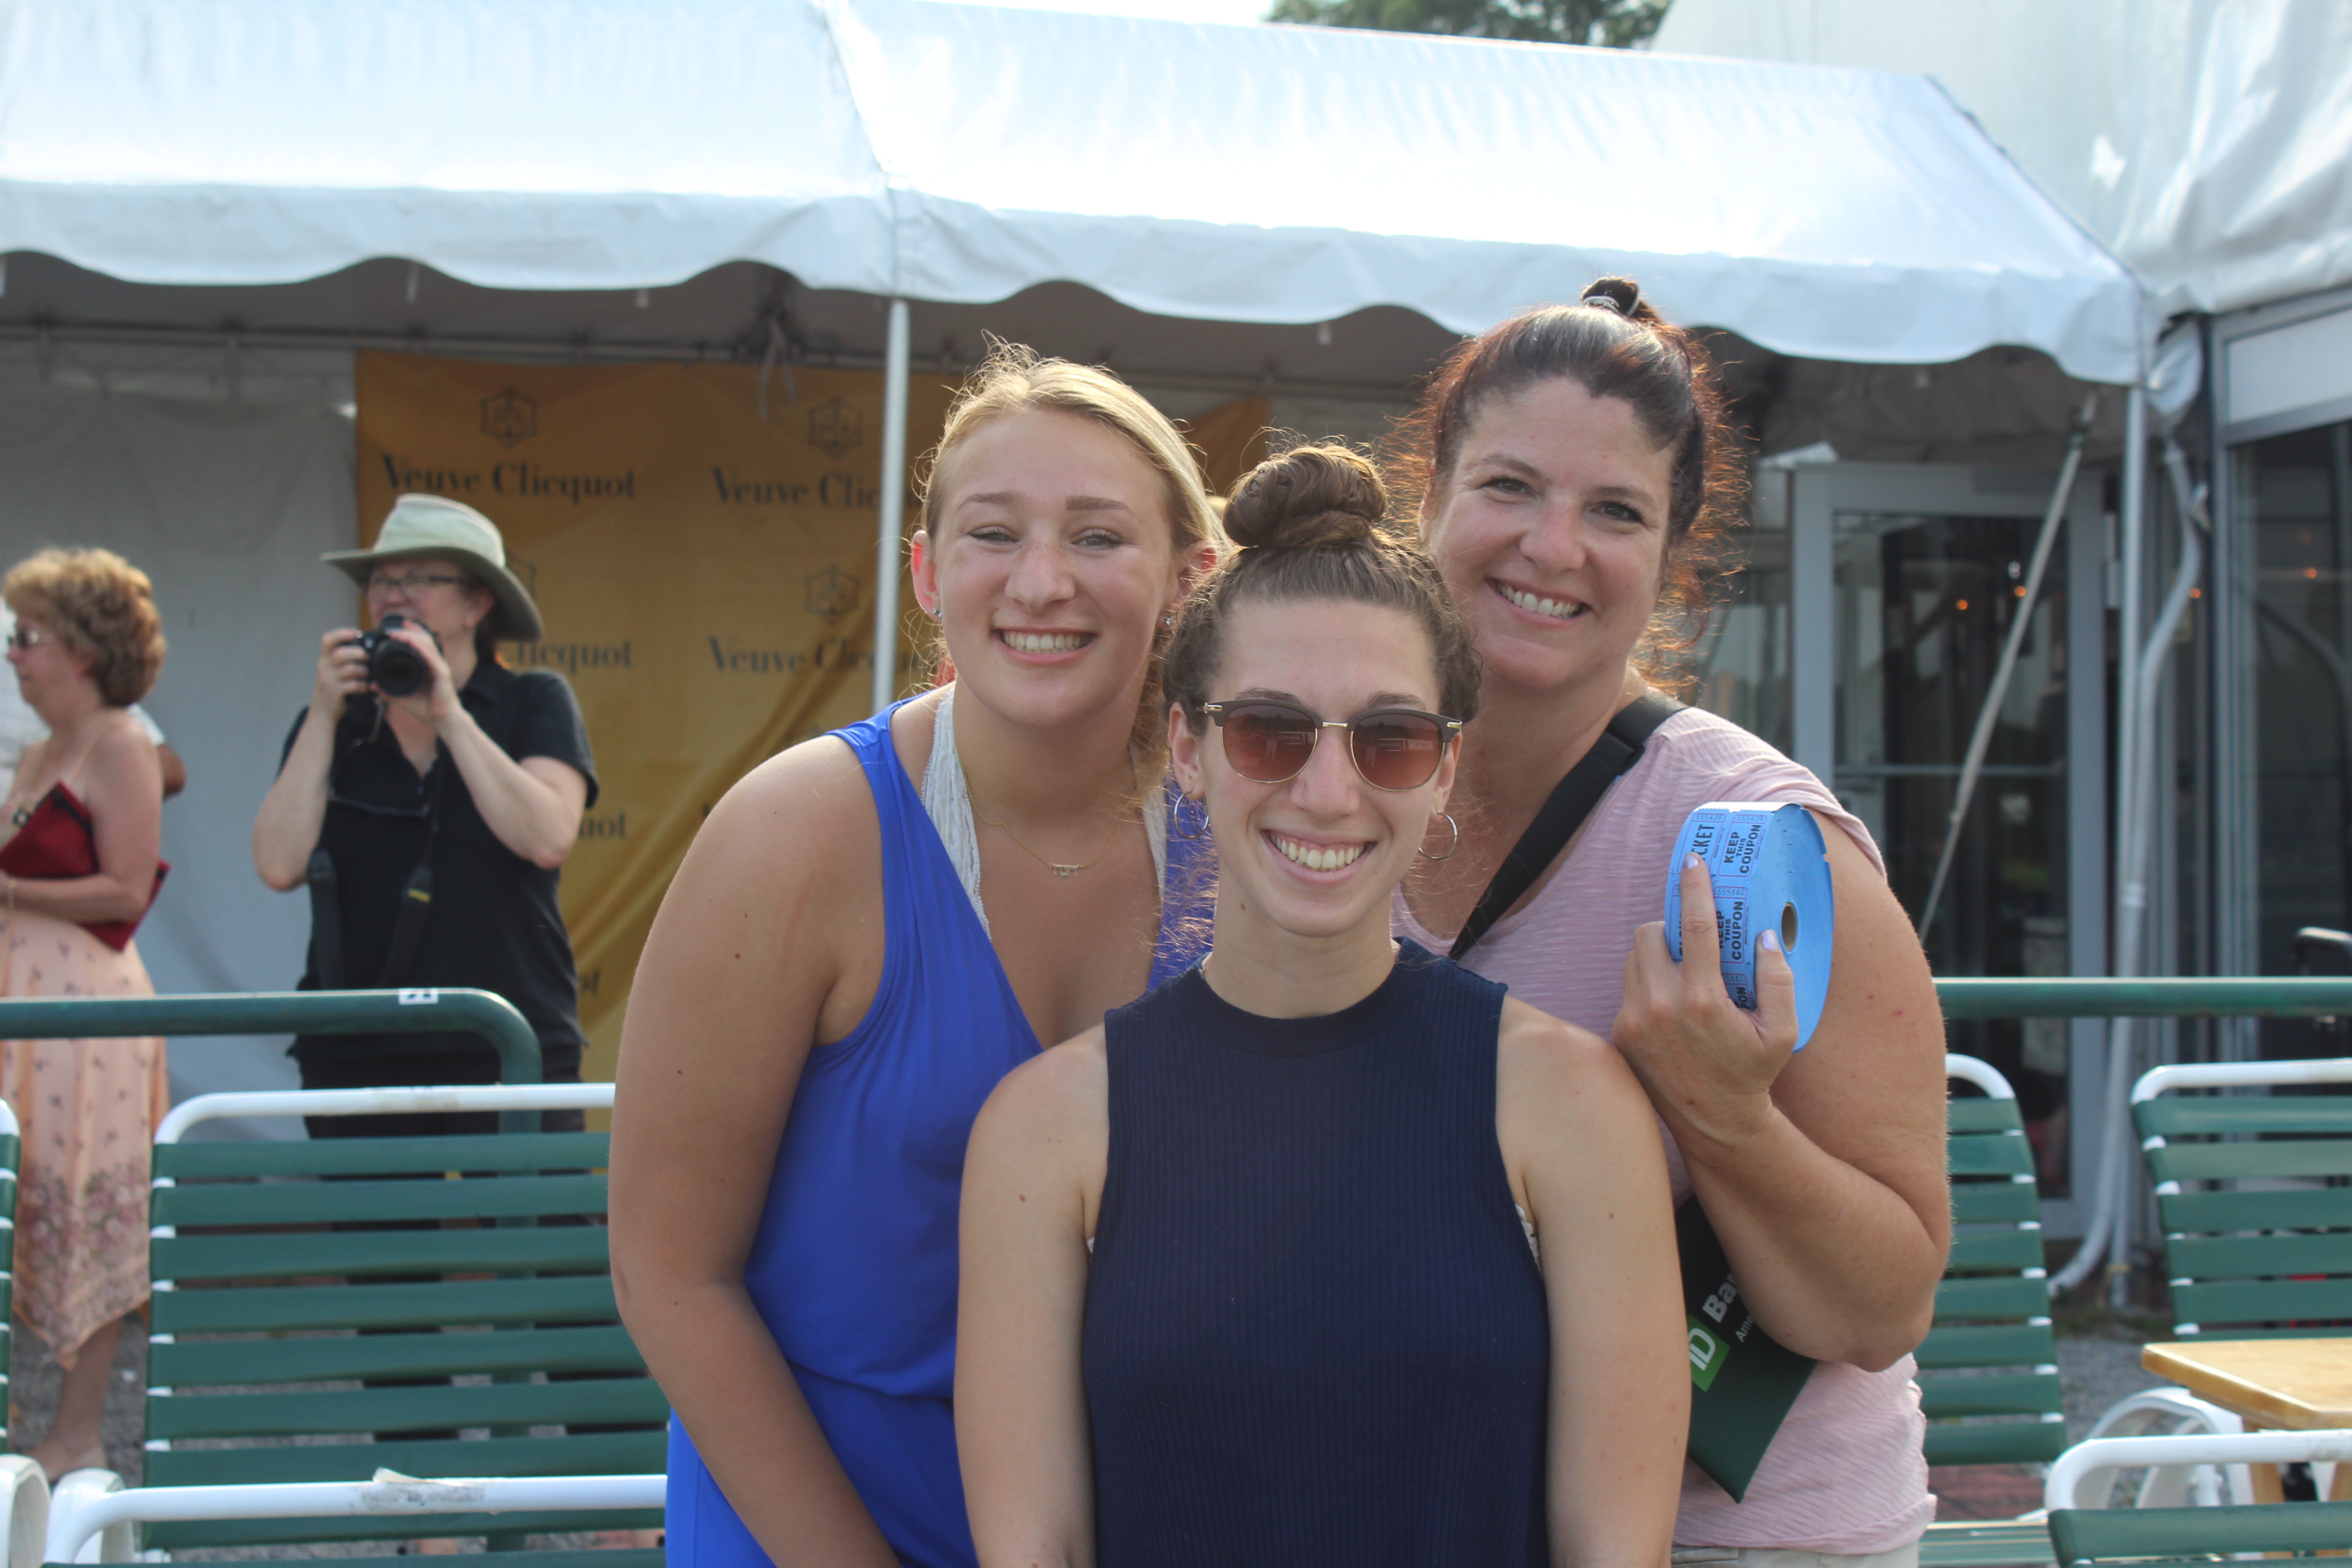 Group of three woman volunteering at the Saratoga Dog & Pony Show to benefit AIM Services, Inc.